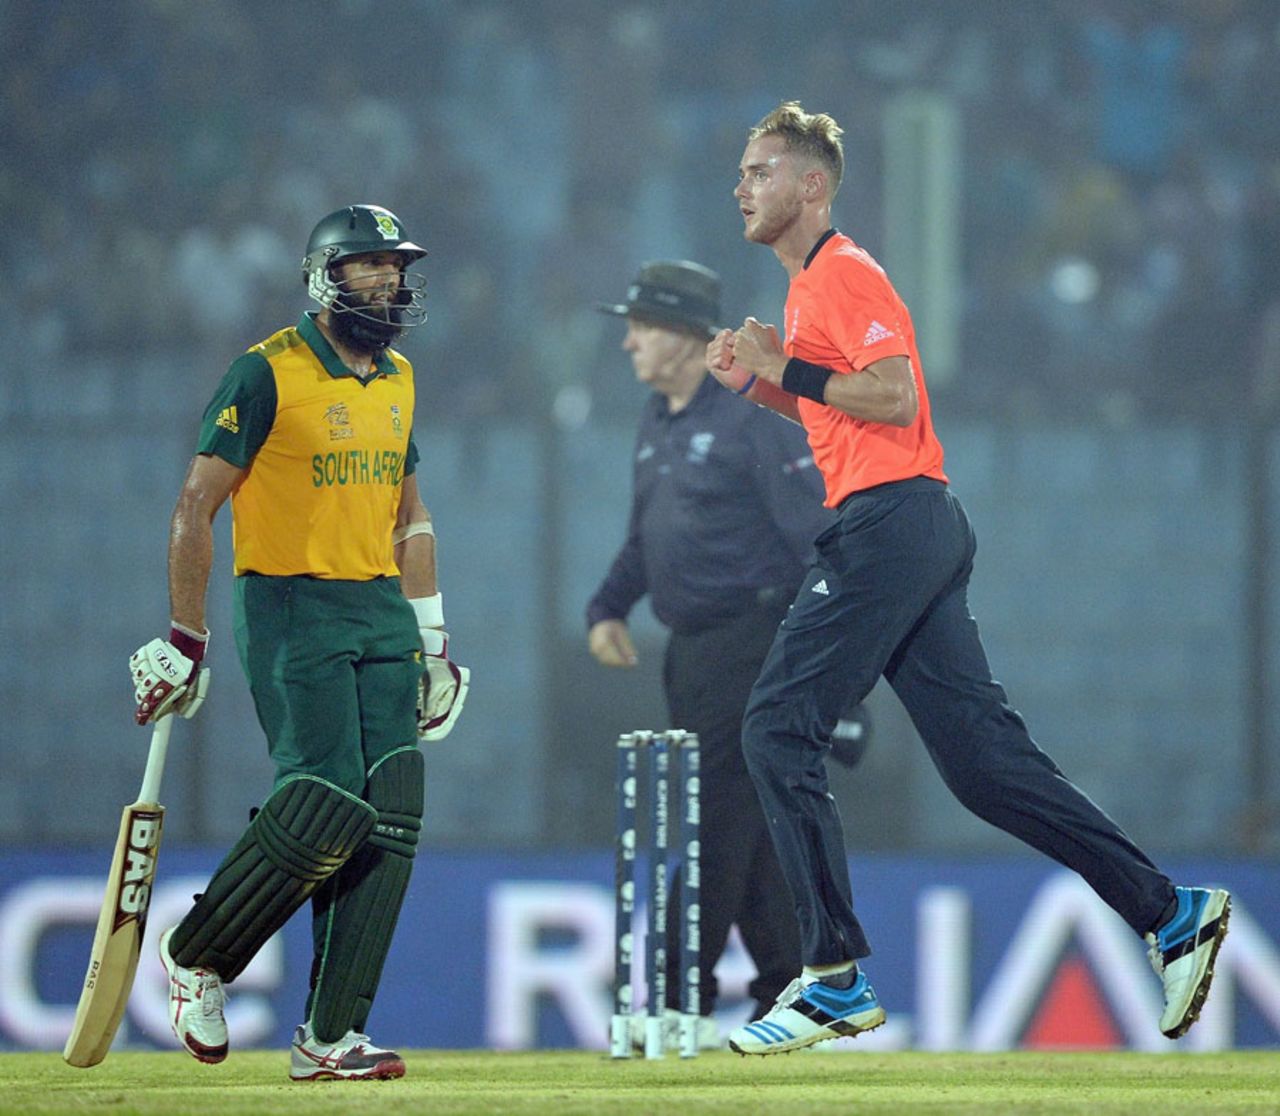 Hashim Amla was dismissed by Stuart Broad for 56, England v South Africa, World Twenty20 2014, Group 1, Chittagong, March 29, 2014